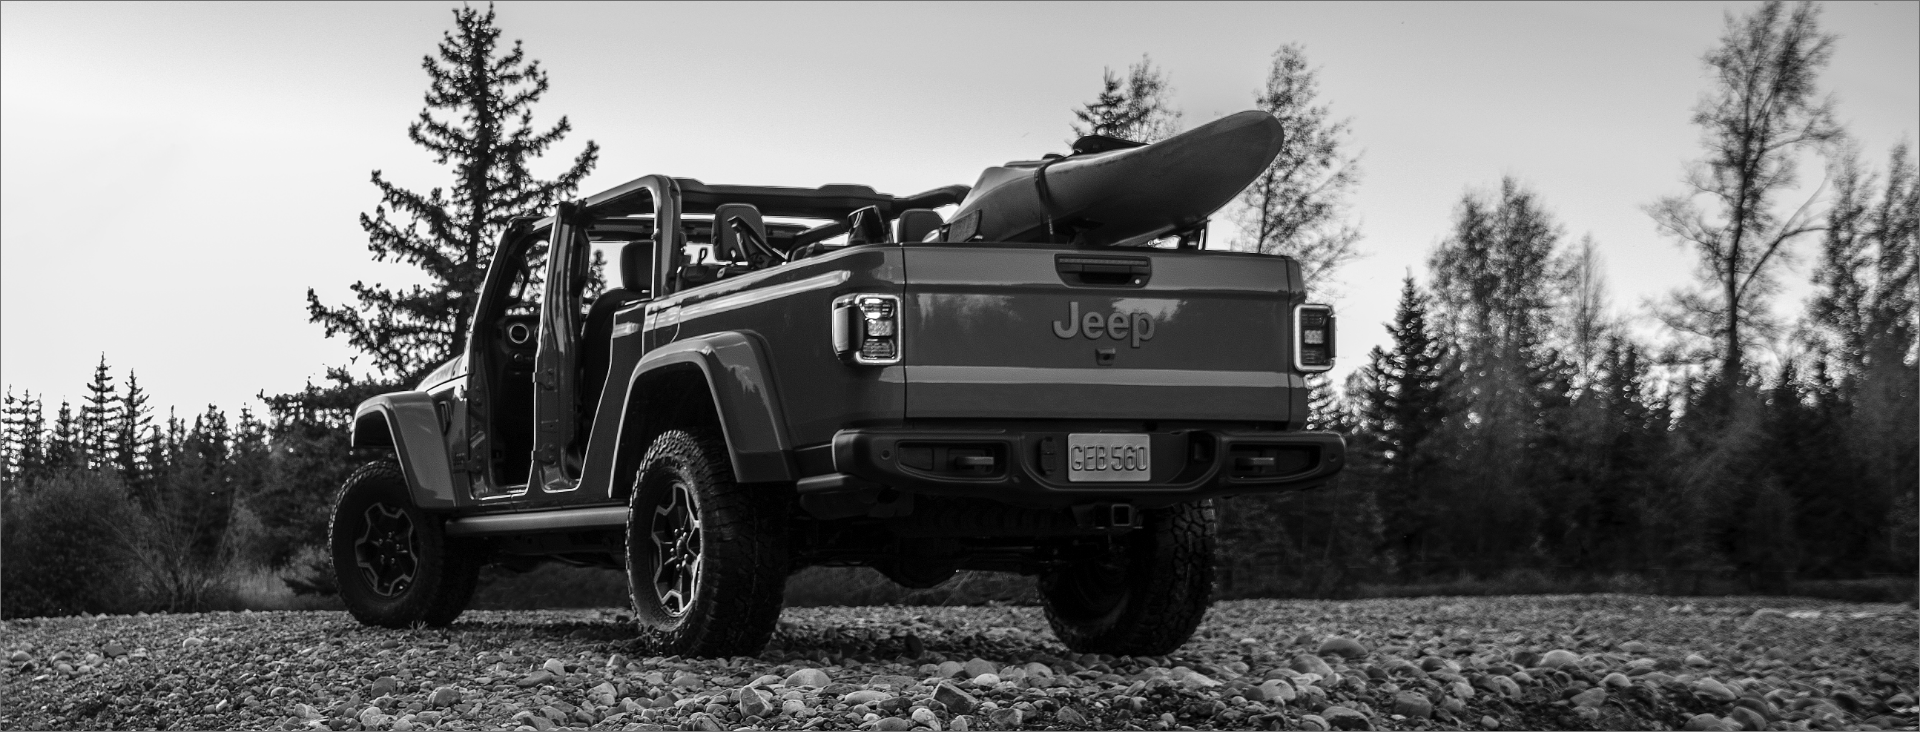 Terms & Conditions | Jeep